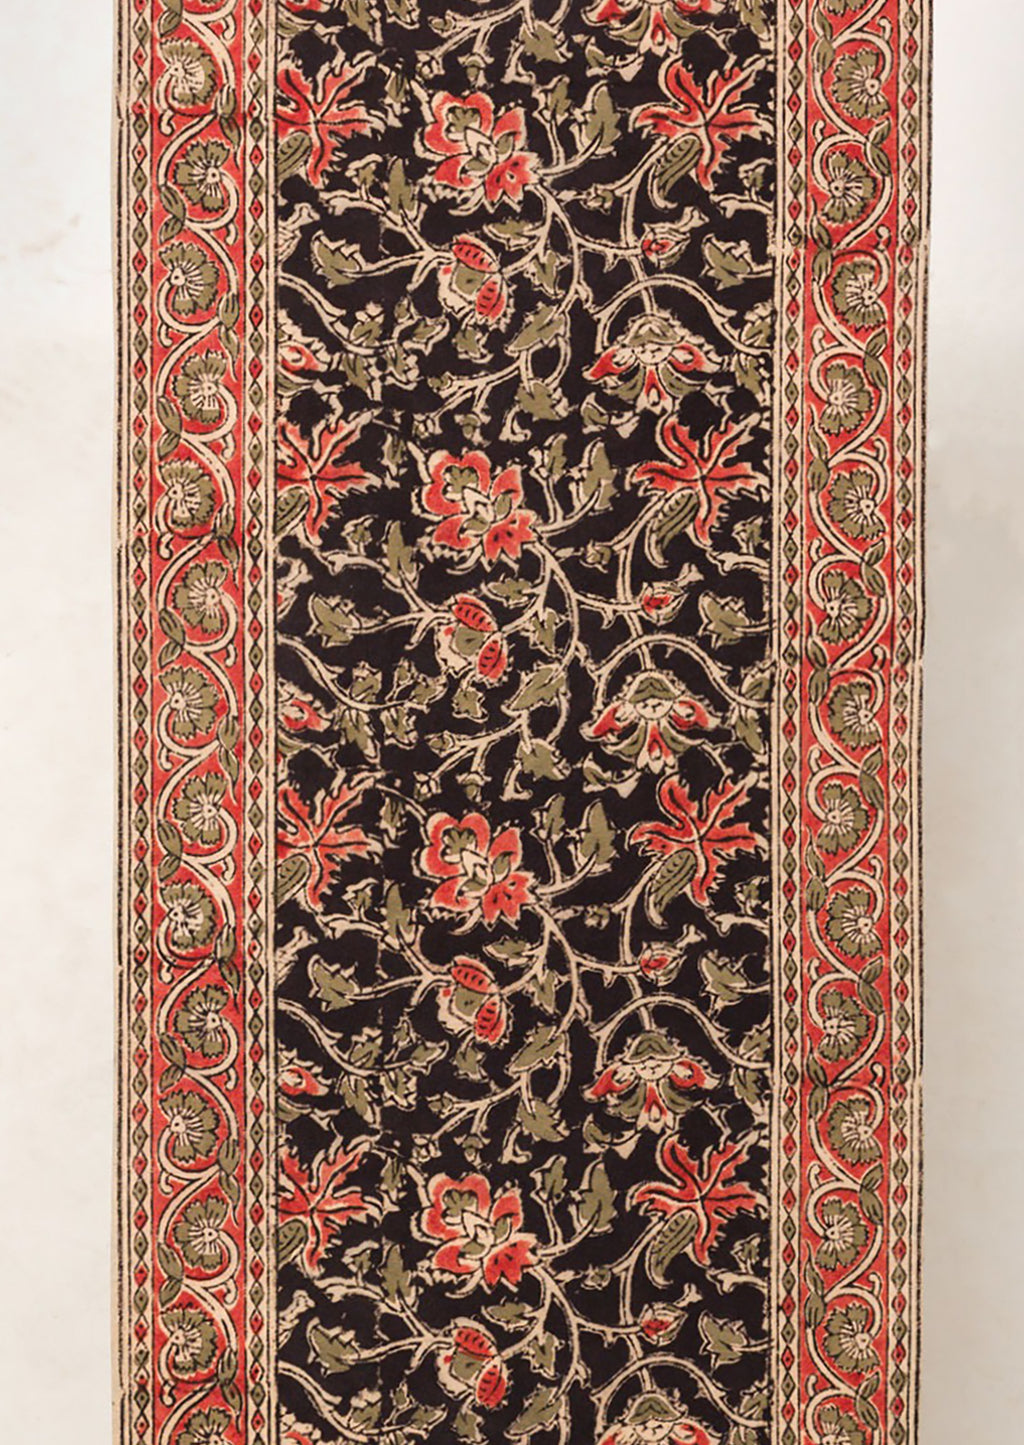 2: A table runner with black and red floral print.